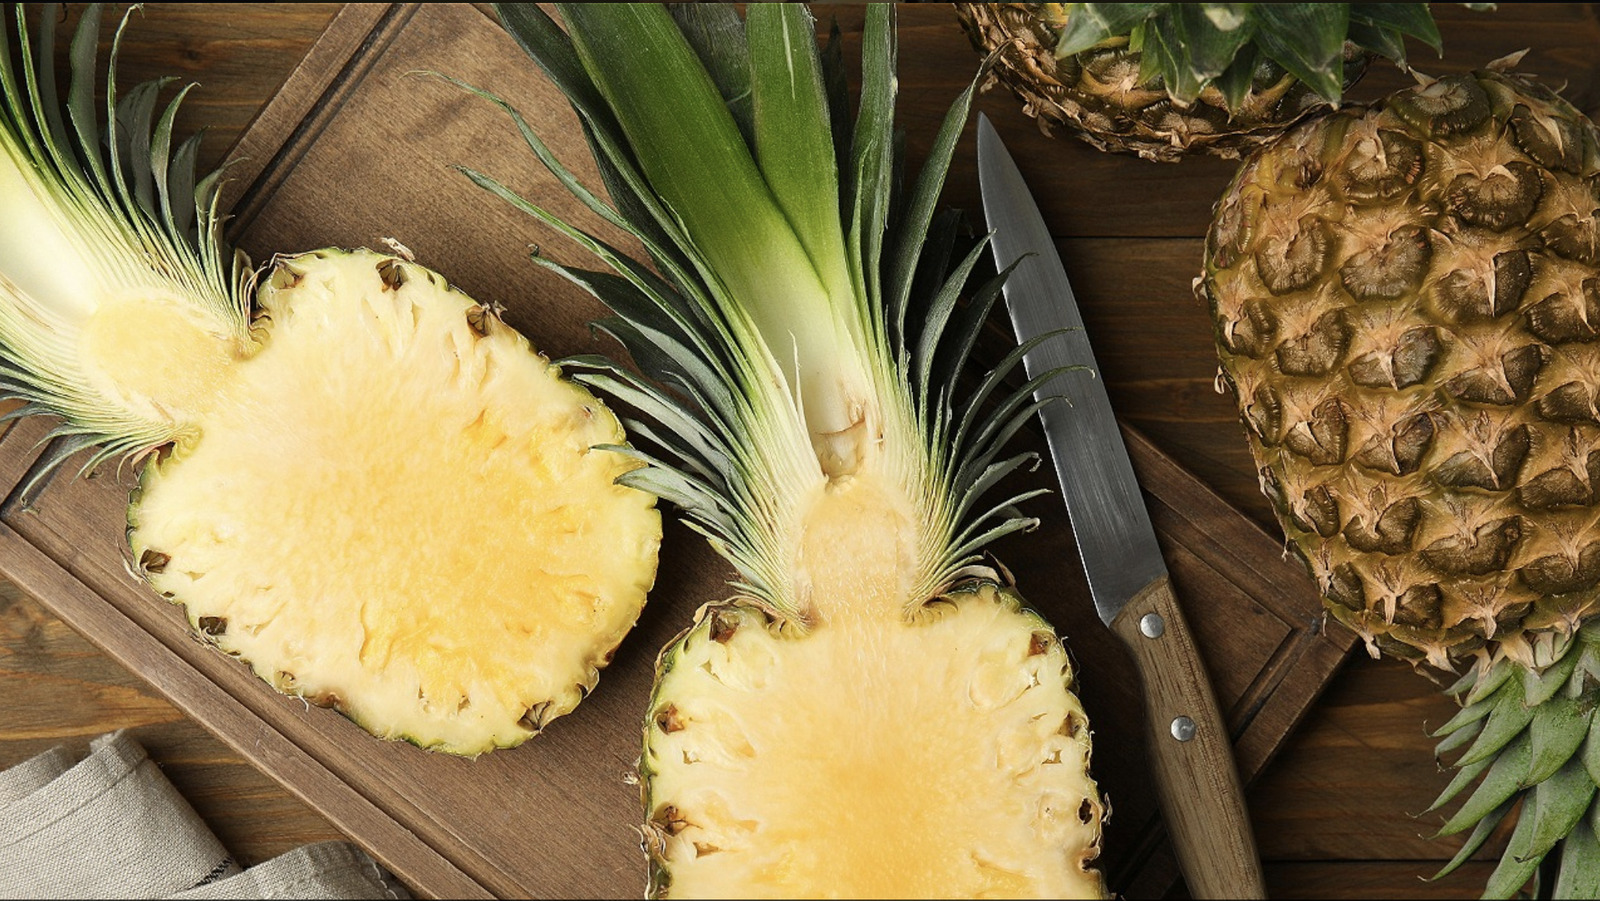 The Viral Hack That Makes Cutting Pesky Pineapple A Breeze – Mashed